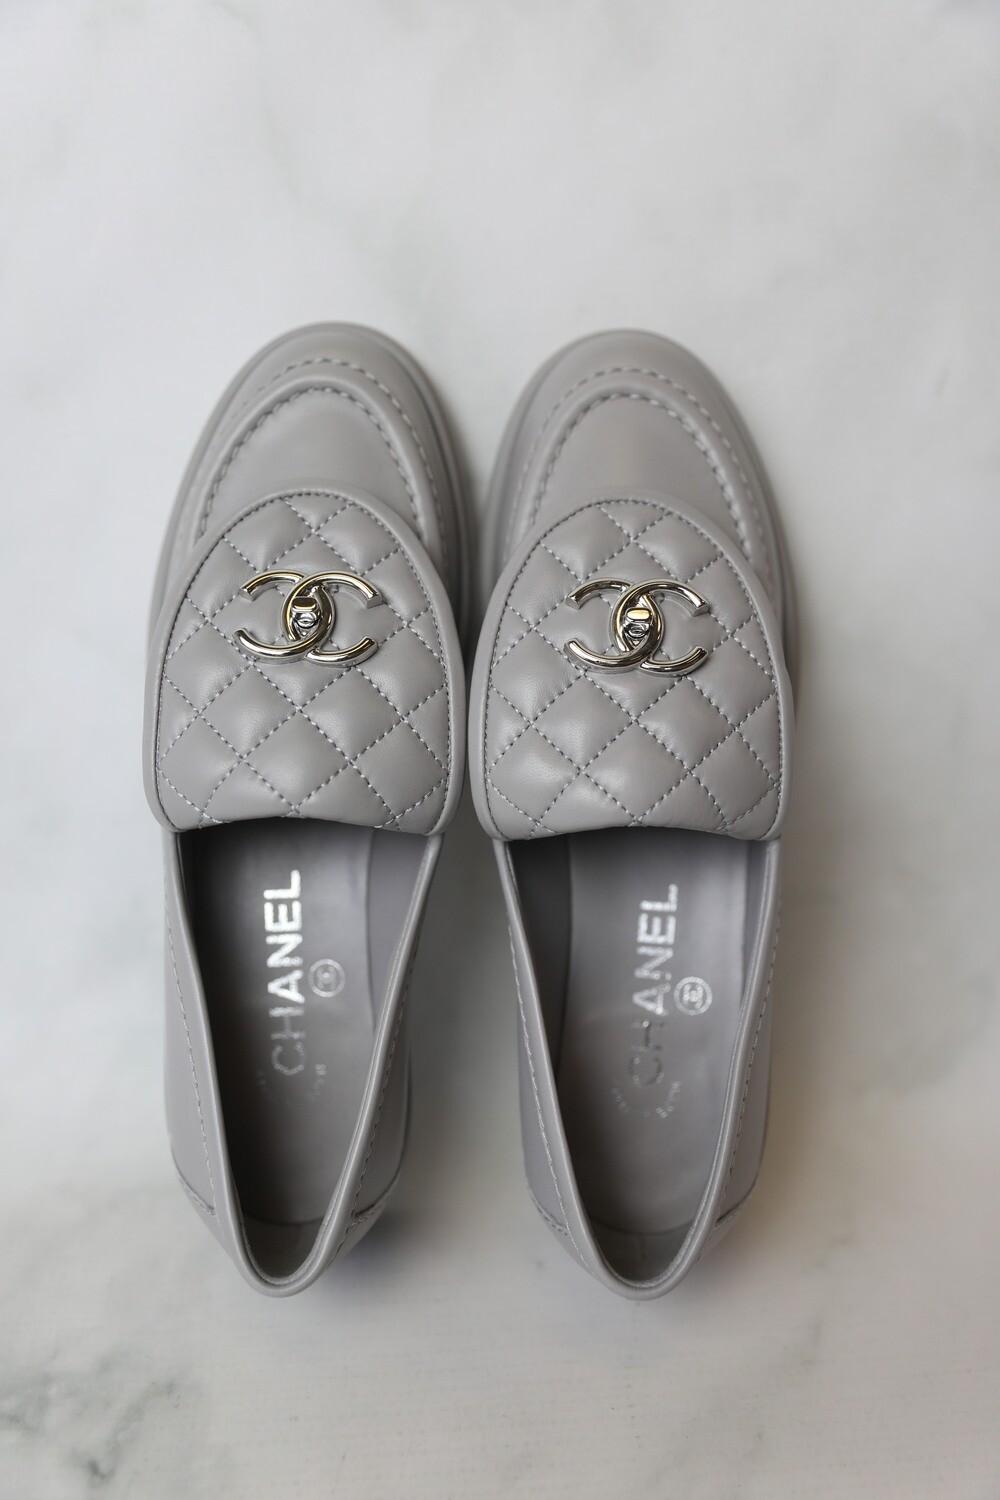 Chanel Loafers-Reveal & Review. Worth the hype? 